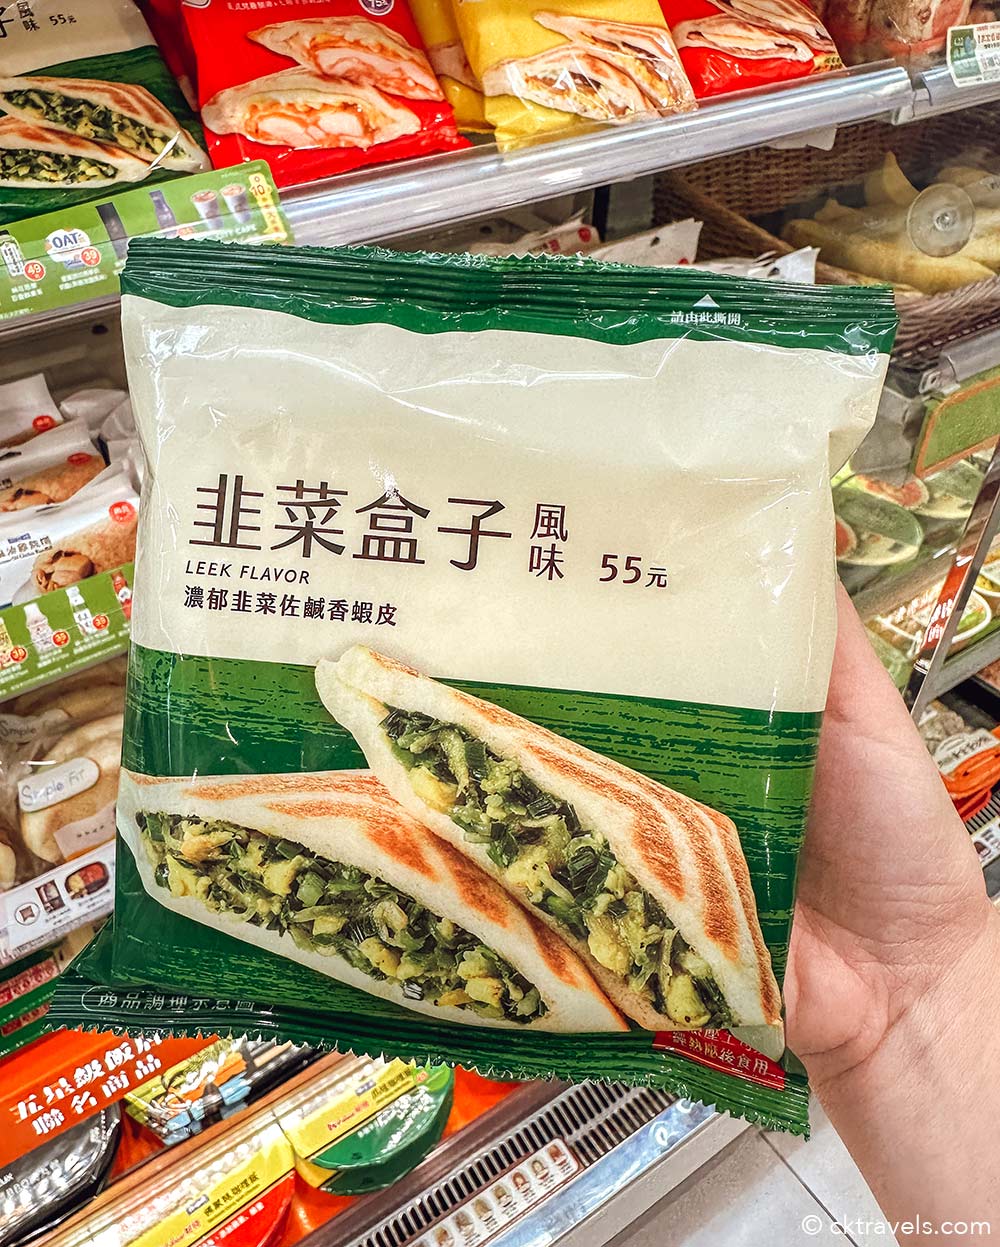 Leek toasted sandwich at Taiwan 7-Eleven